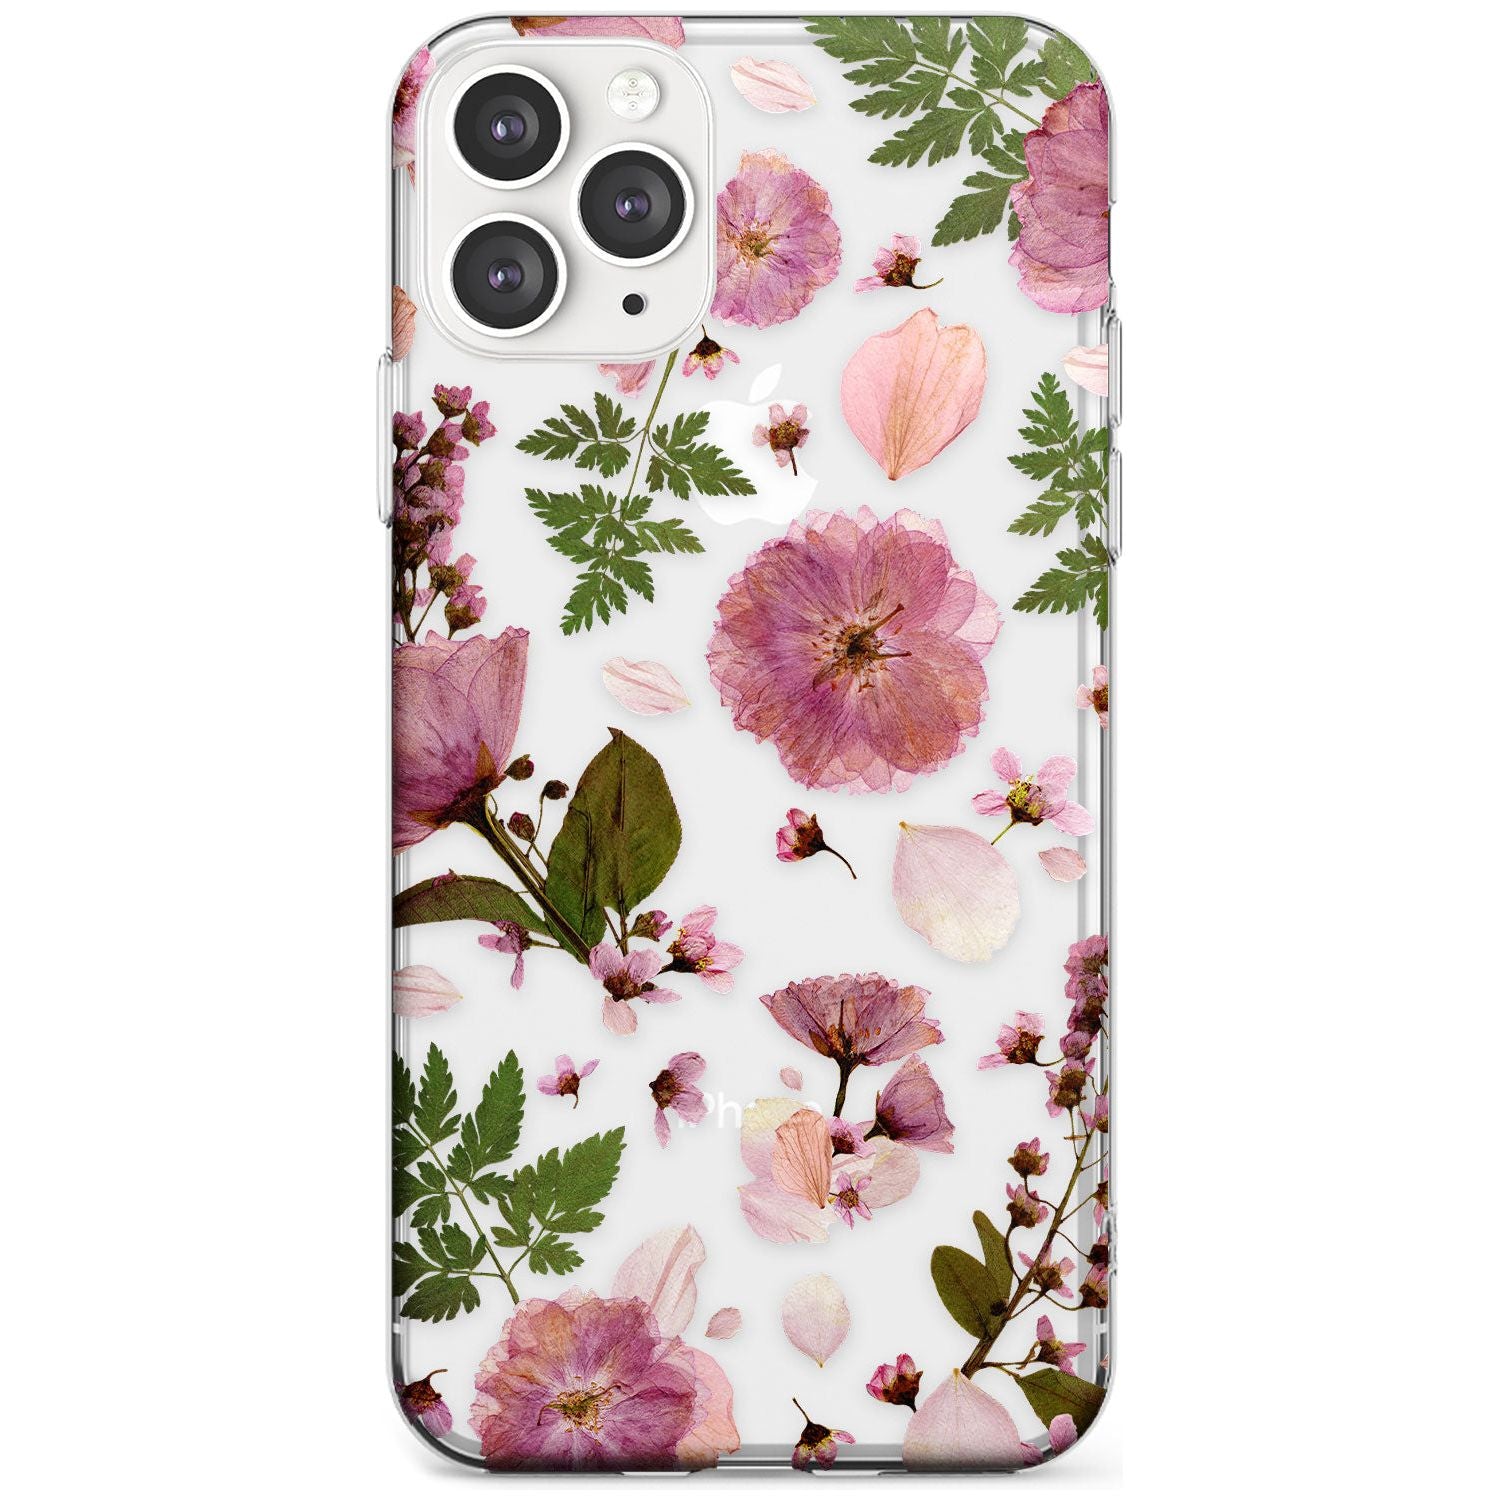 Natural Arrangement of Flowers & Leaves Design Slim TPU Phone Case for iPhone 11 Pro Max